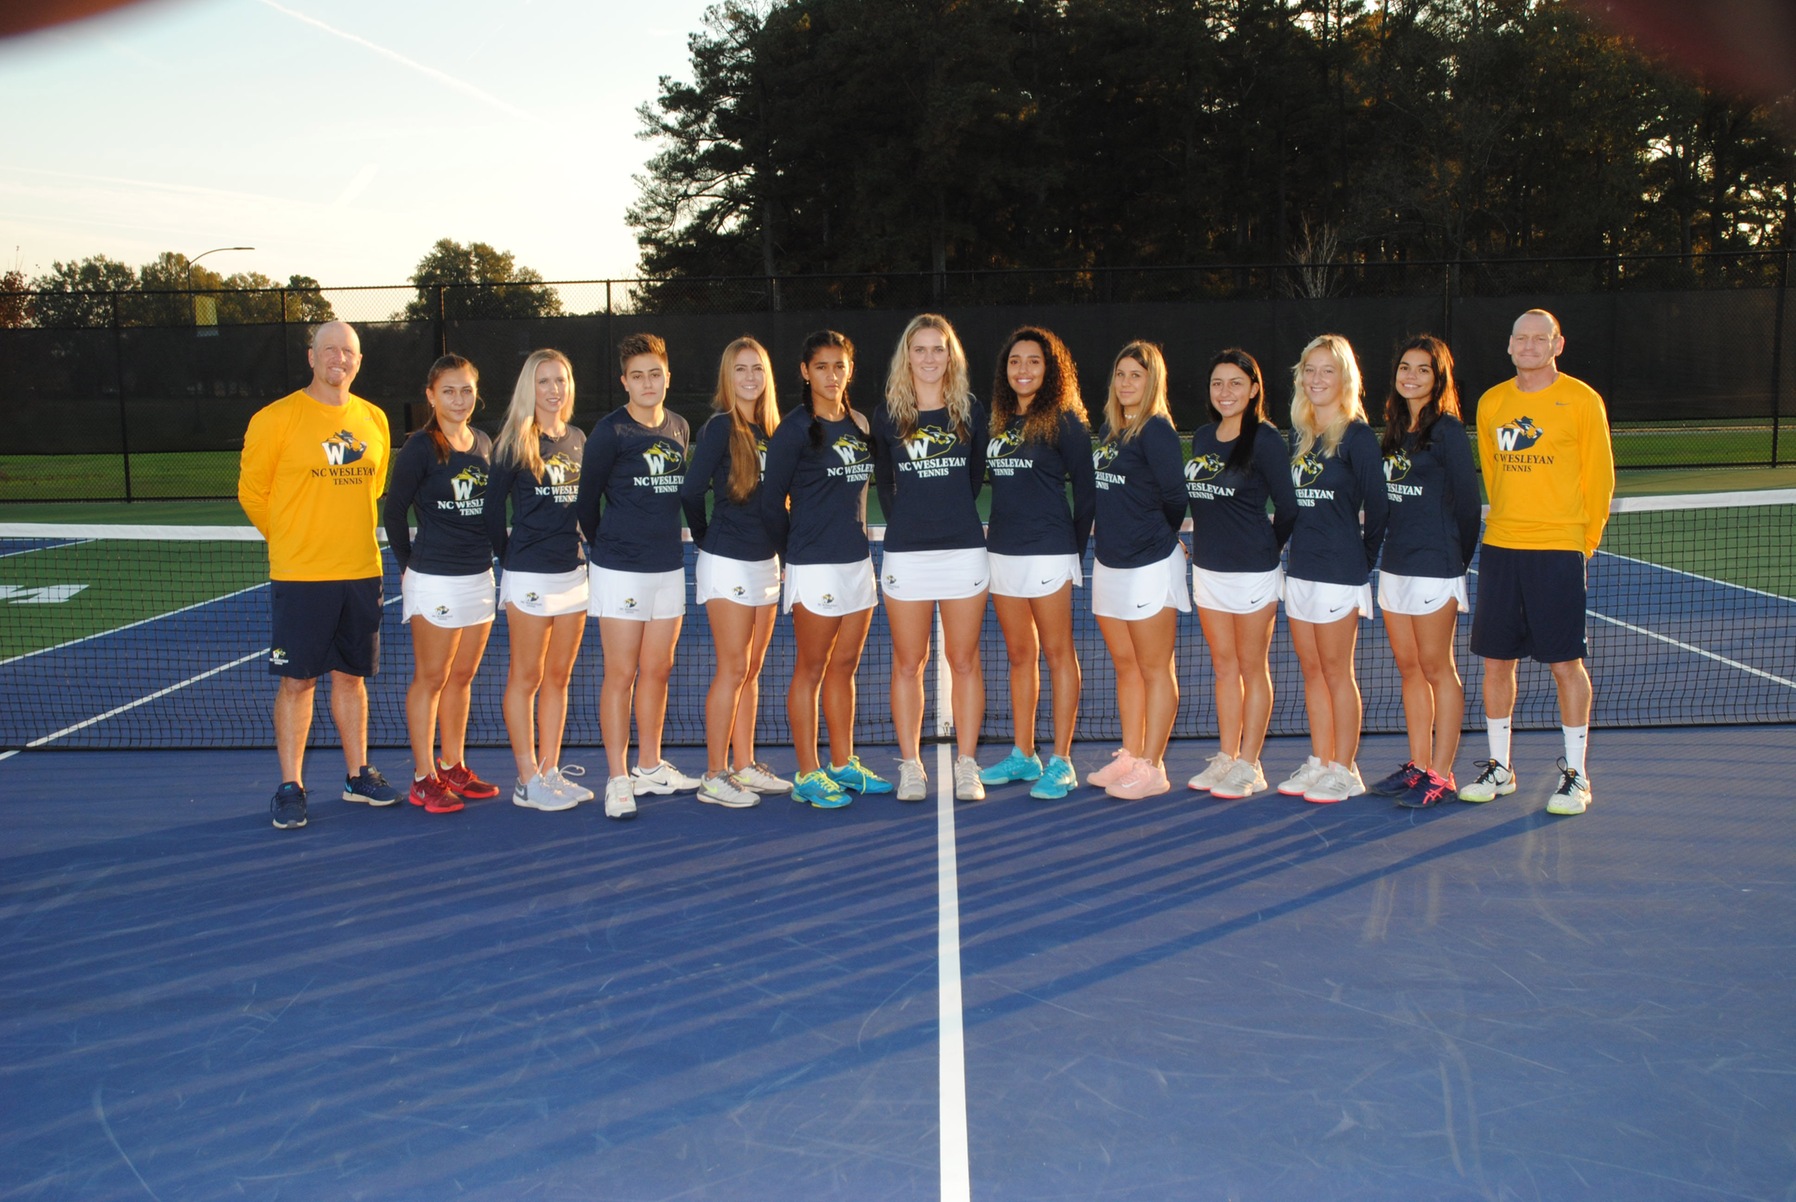 Women's Tennis to play Hanover in 5-team Regional at Emory